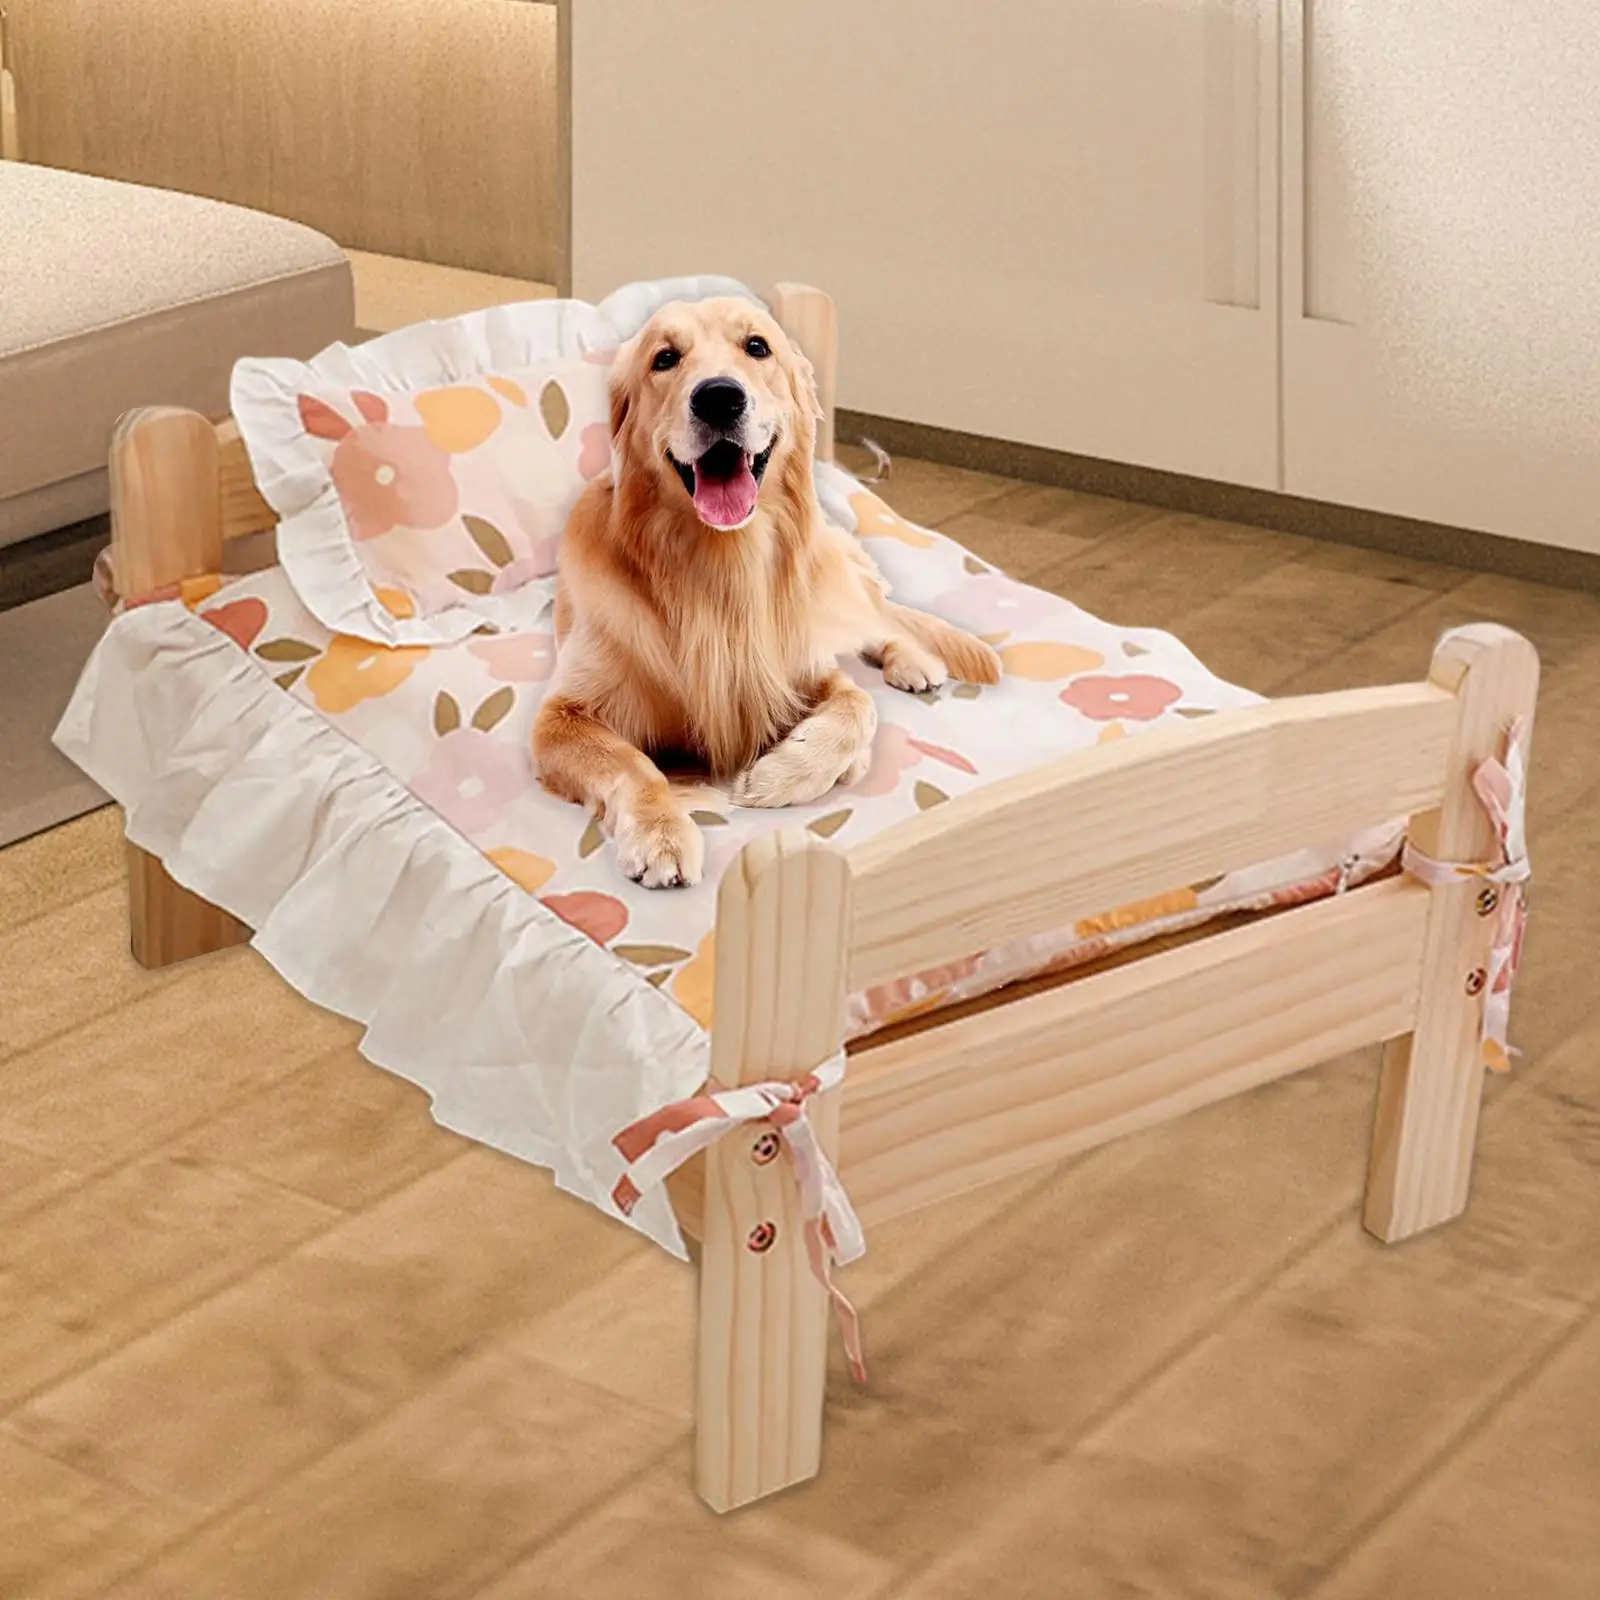 Pet Cat Sleeping Bed Dog House Wood Puppy Kennel Kitten House Elevated Pet Bed for Cats Puppy